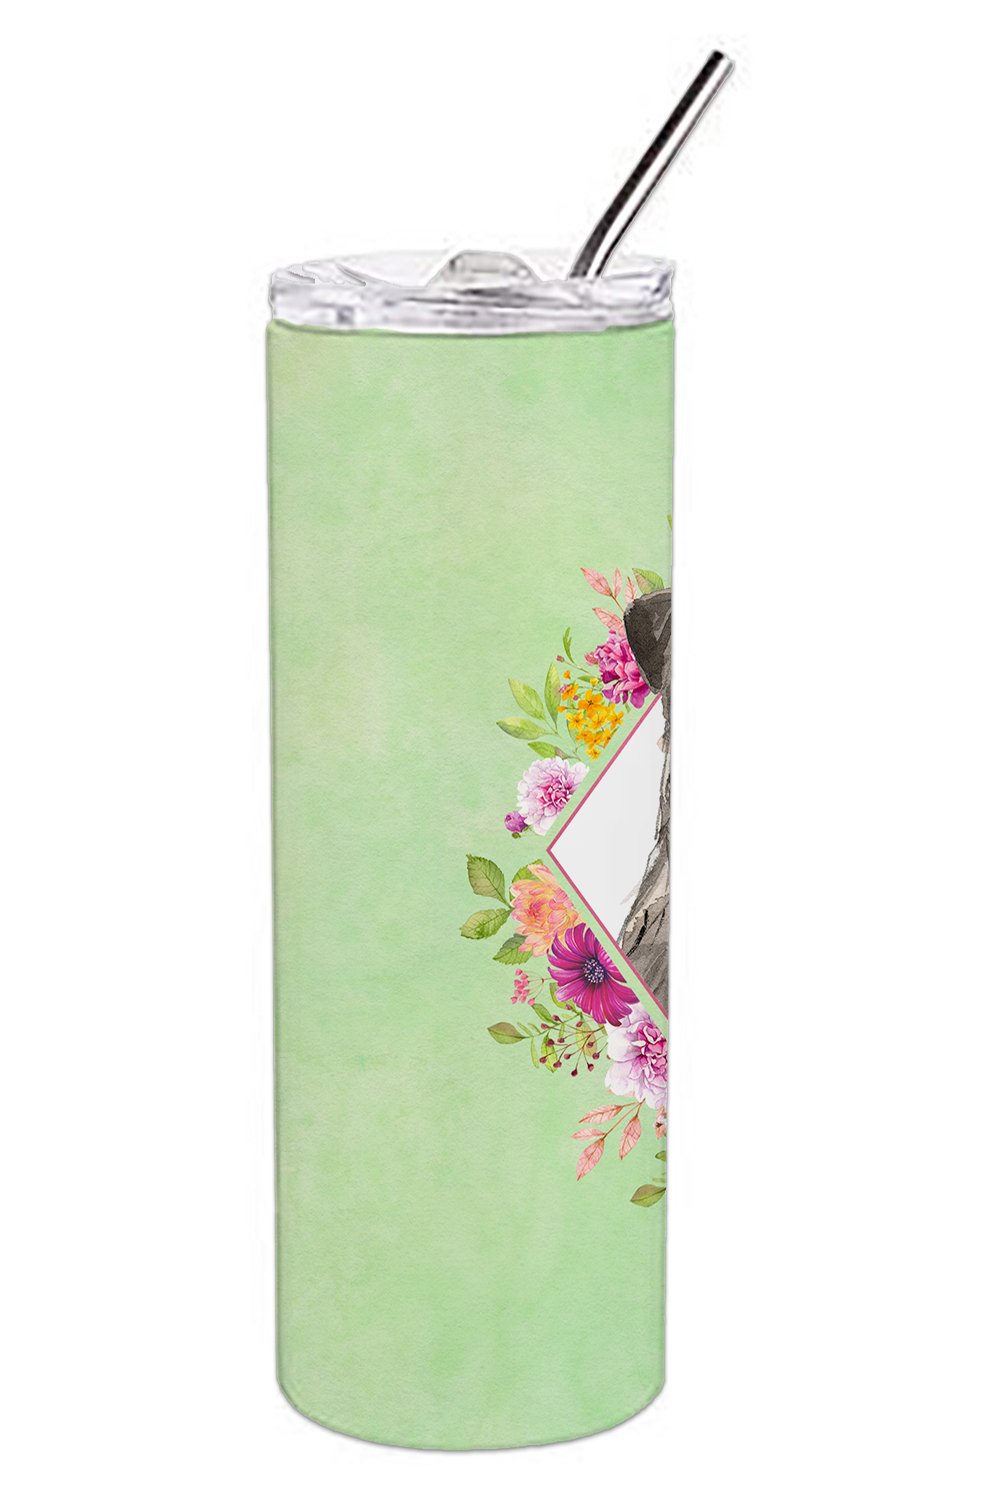 Irish Wolfhound Green Flowers Double Walled Stainless Steel 20 oz Skinny Tumbler CK4391TBL20 by Caroline's Treasures